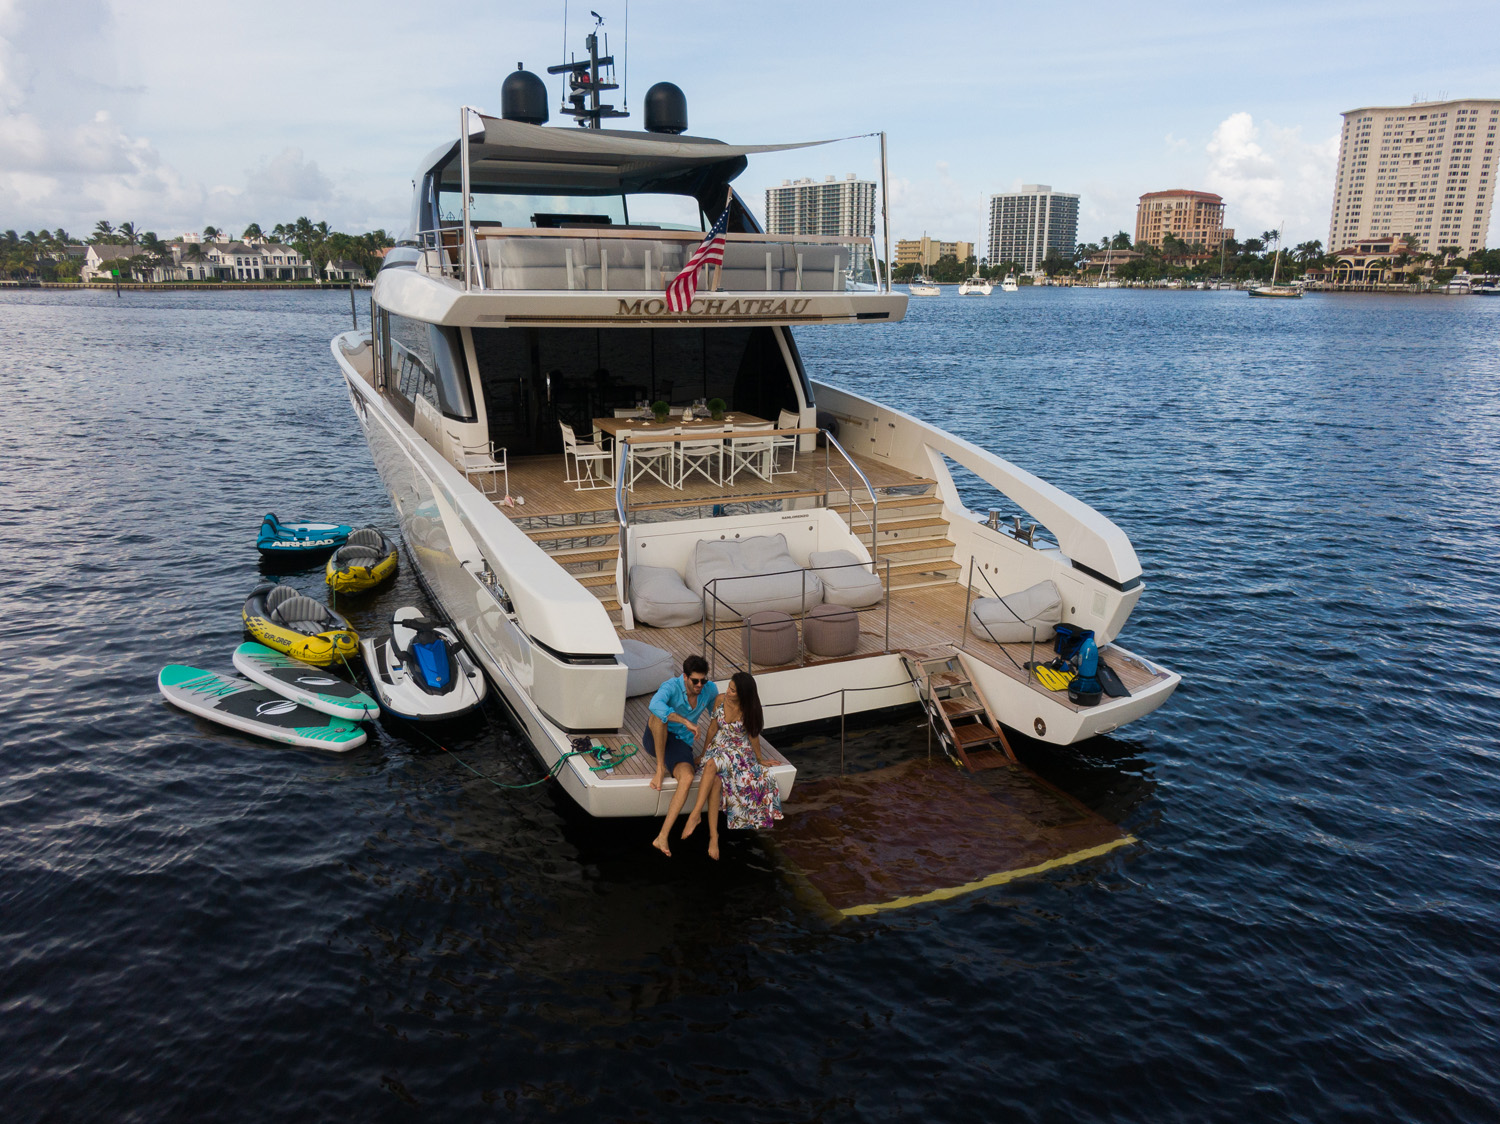 Discounted rate on brand new luxury charter yacht Mon Chateau in the Bahamas